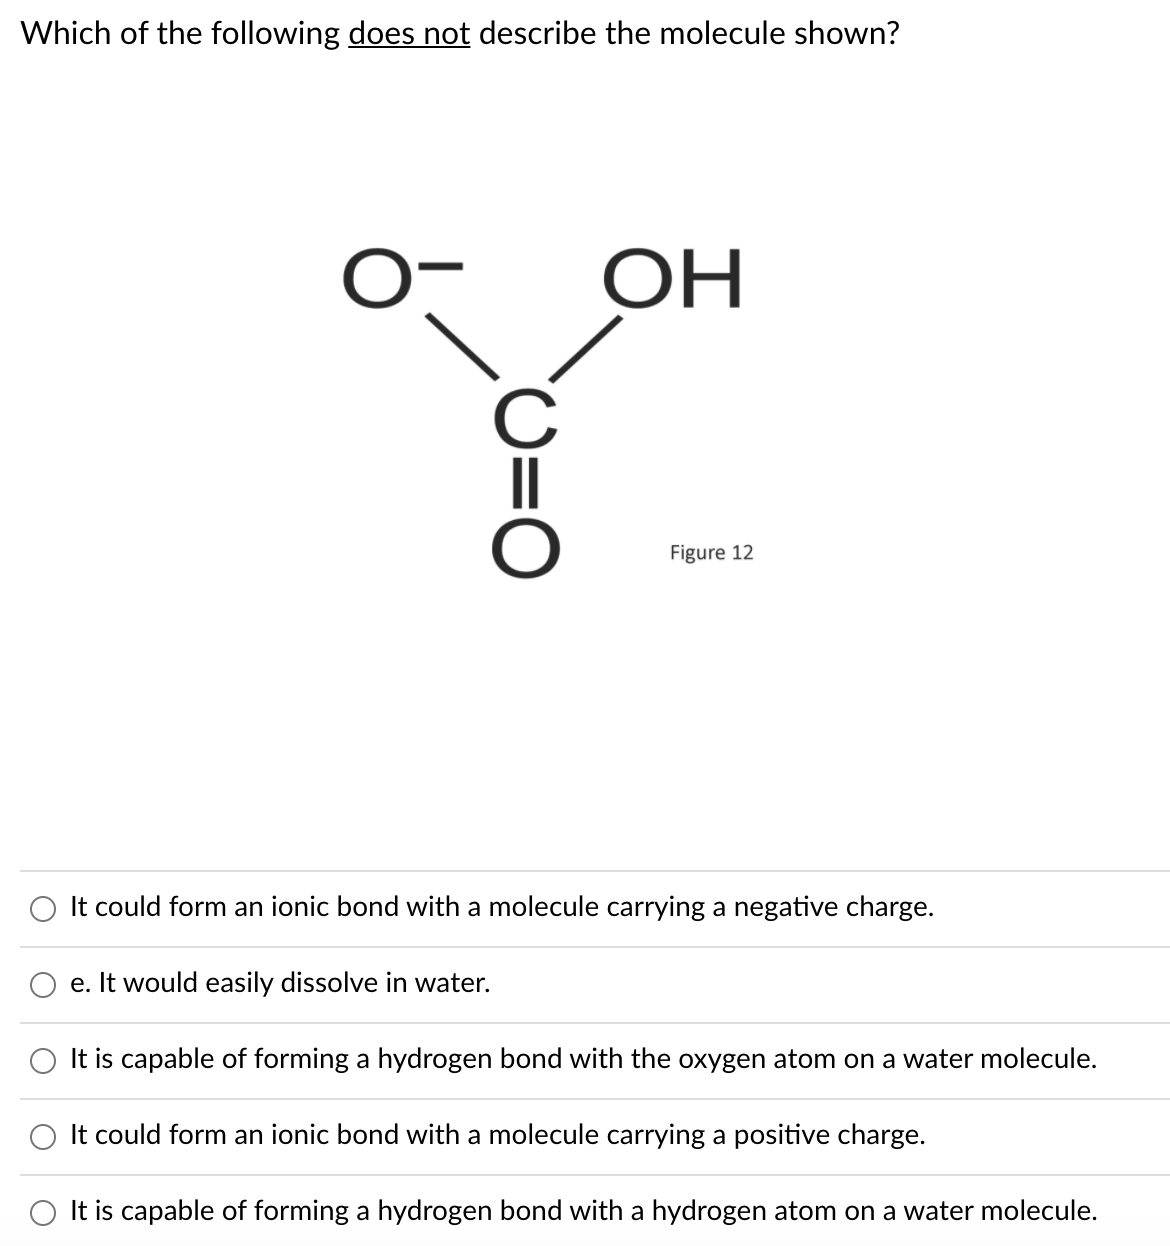 Which of the following does not describe the molecule shown?
OH
C
Figure 12
O It could form an ionic bond with a molecule carrying a negative charge.
e. It would easily dissolve in water.
It is capable of forming a hydrogen bond with the oxygen atom on a water molecule.
It could form an ionic bond with a molecule carrying a positive charge.
O It is capable of forming a hydrogen bond with a hydrogen atom on a water molecule.
